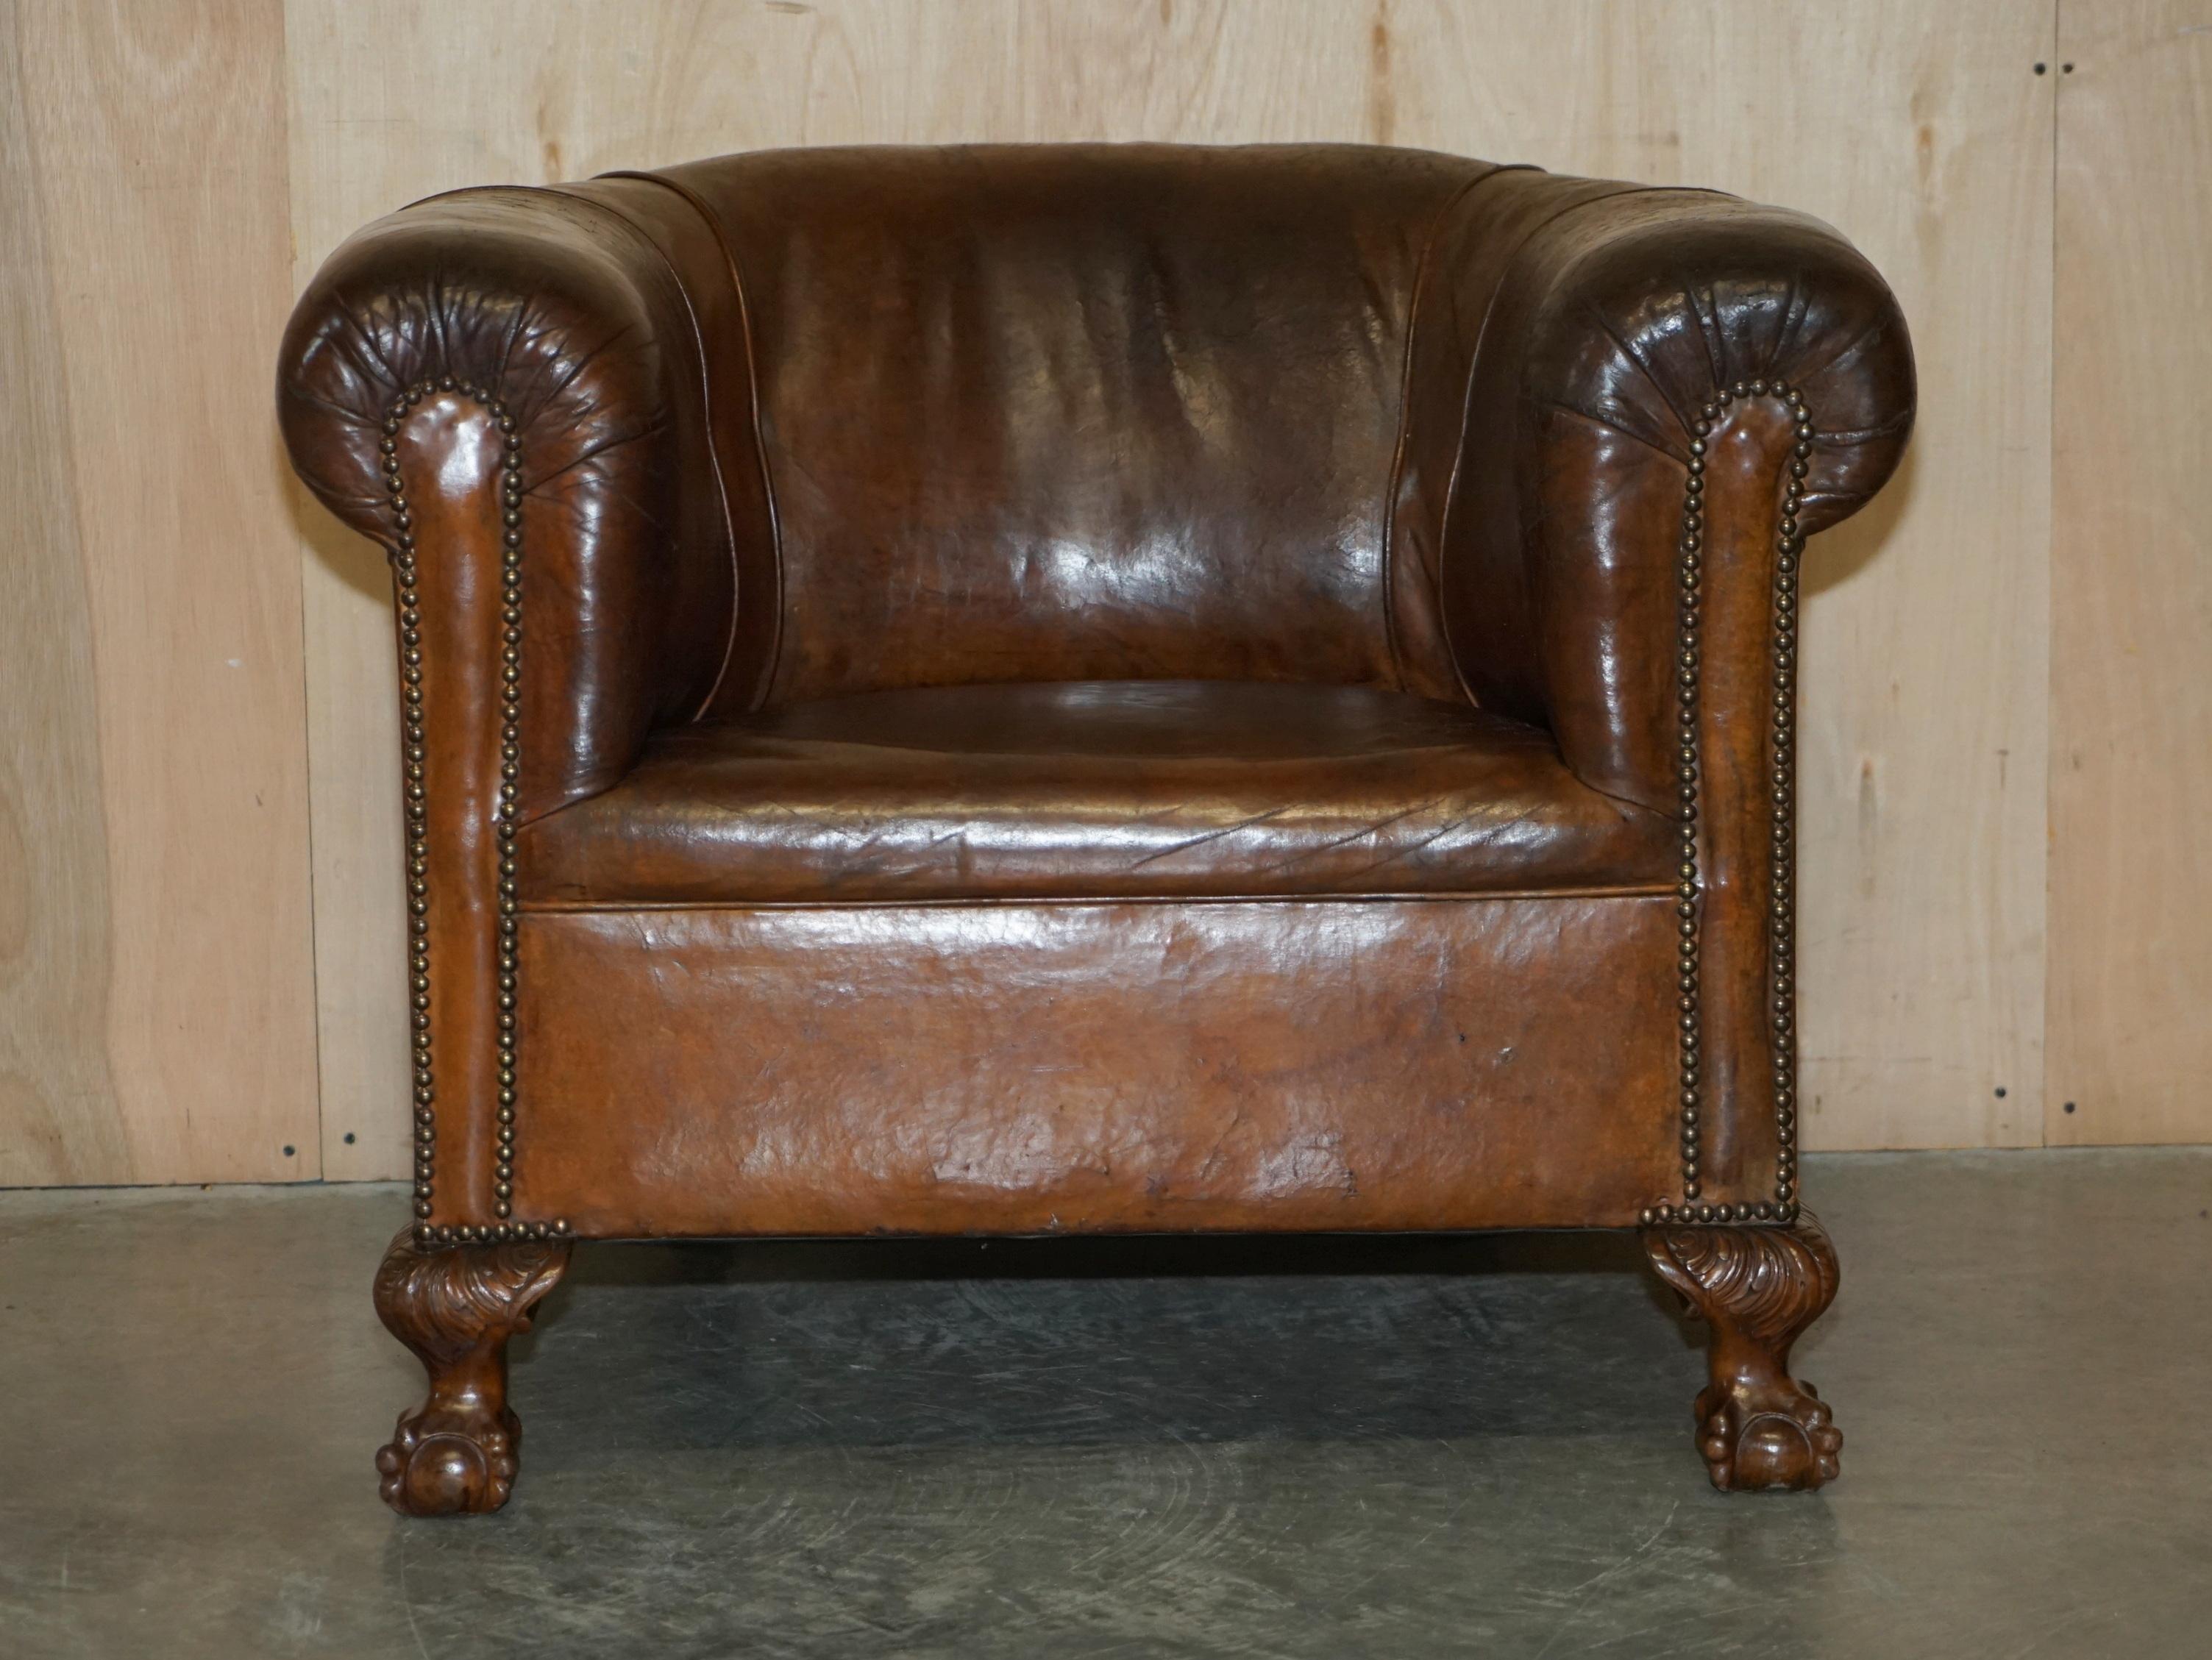 We are delighted to offer for sale this original leather circa 1880 brown leather club armchair with hand carved Claw & Ball feet

A good looking, well made and decorative chair, it is exceptionally comfortable and slightly larger than usual, the